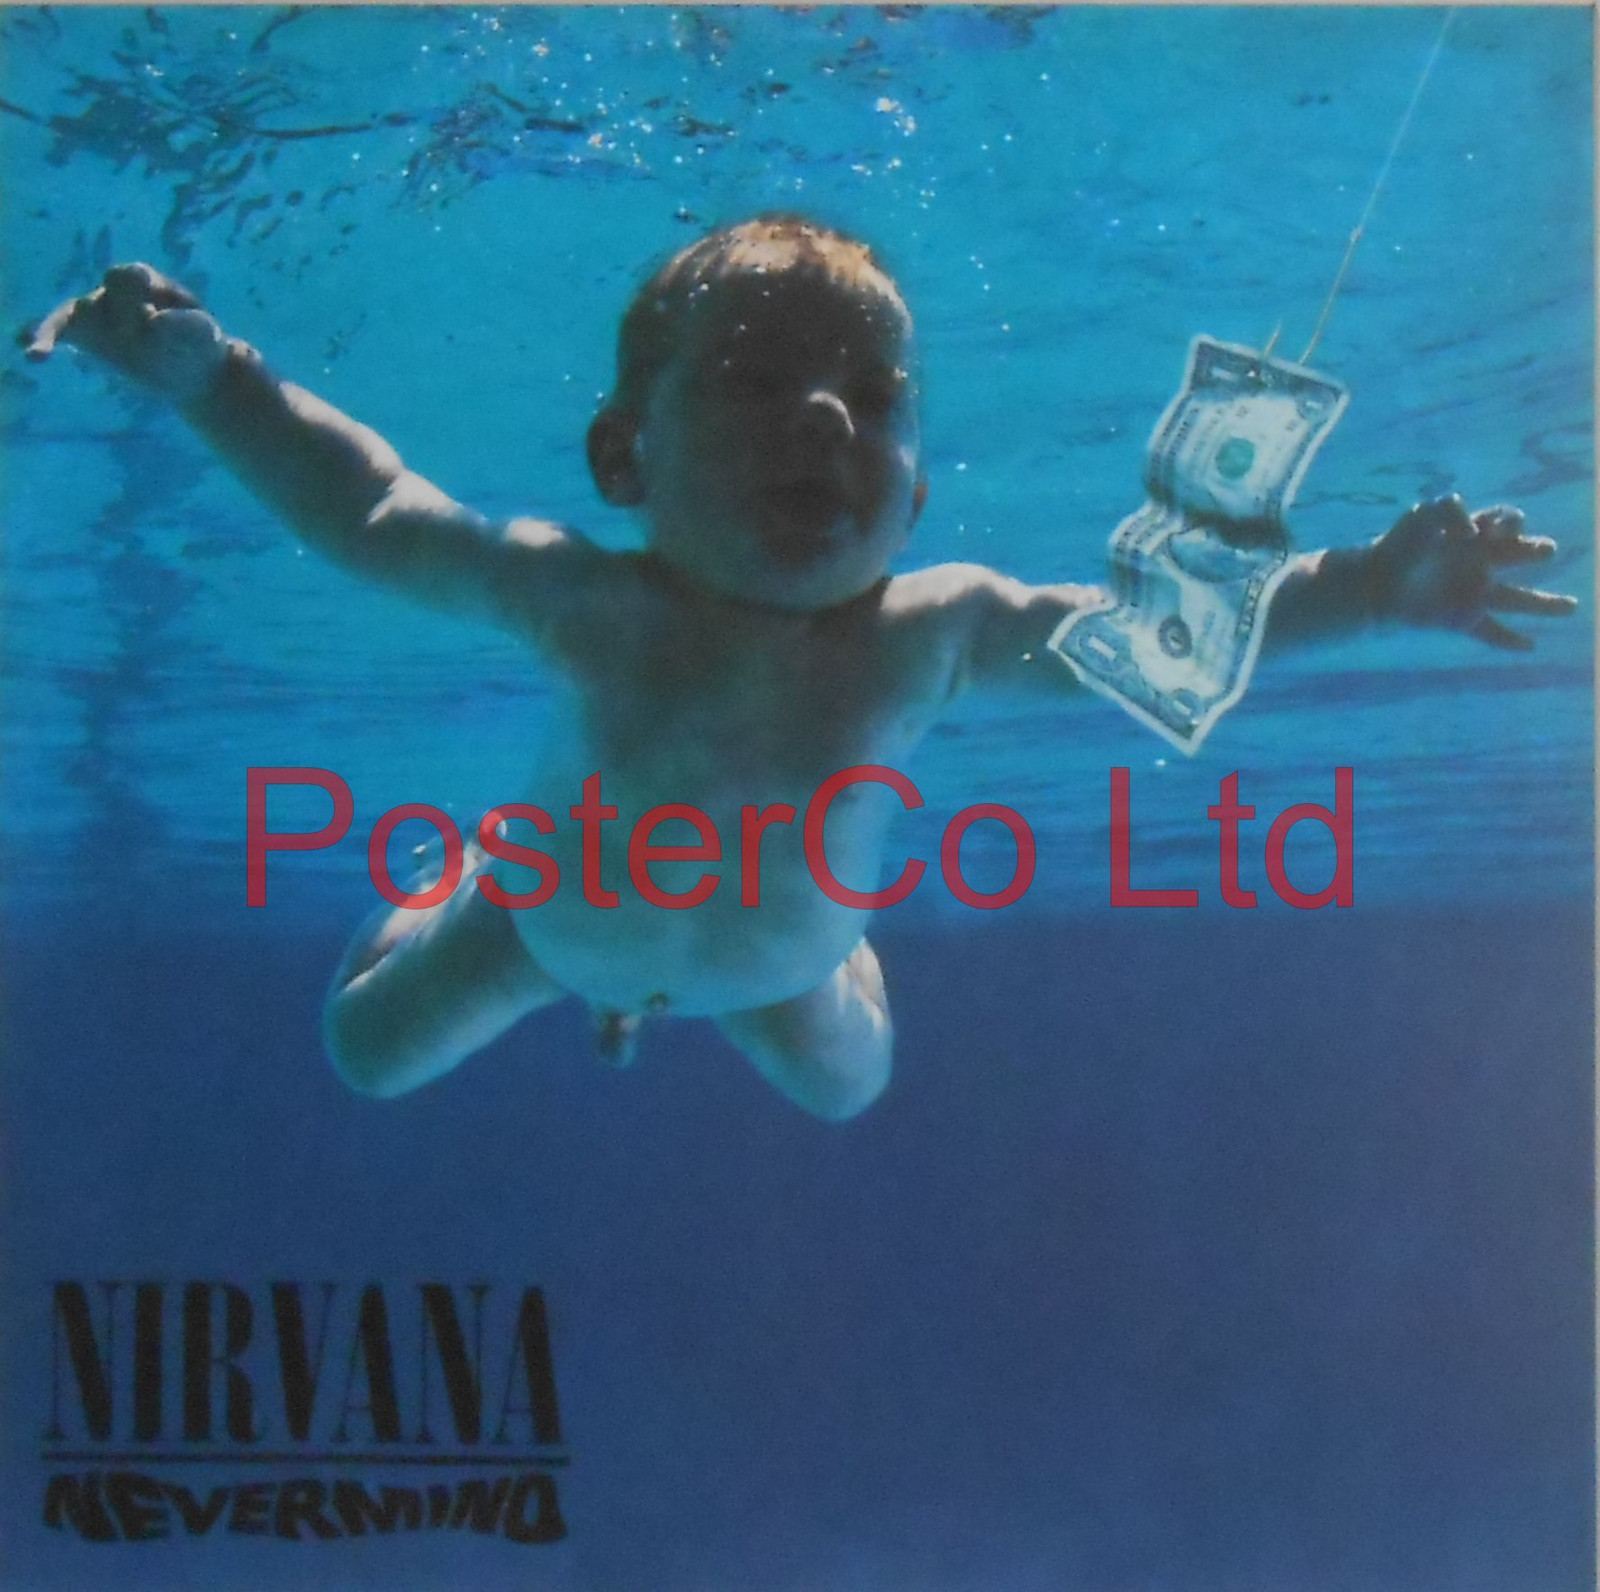 nirvana nevermind cover picture